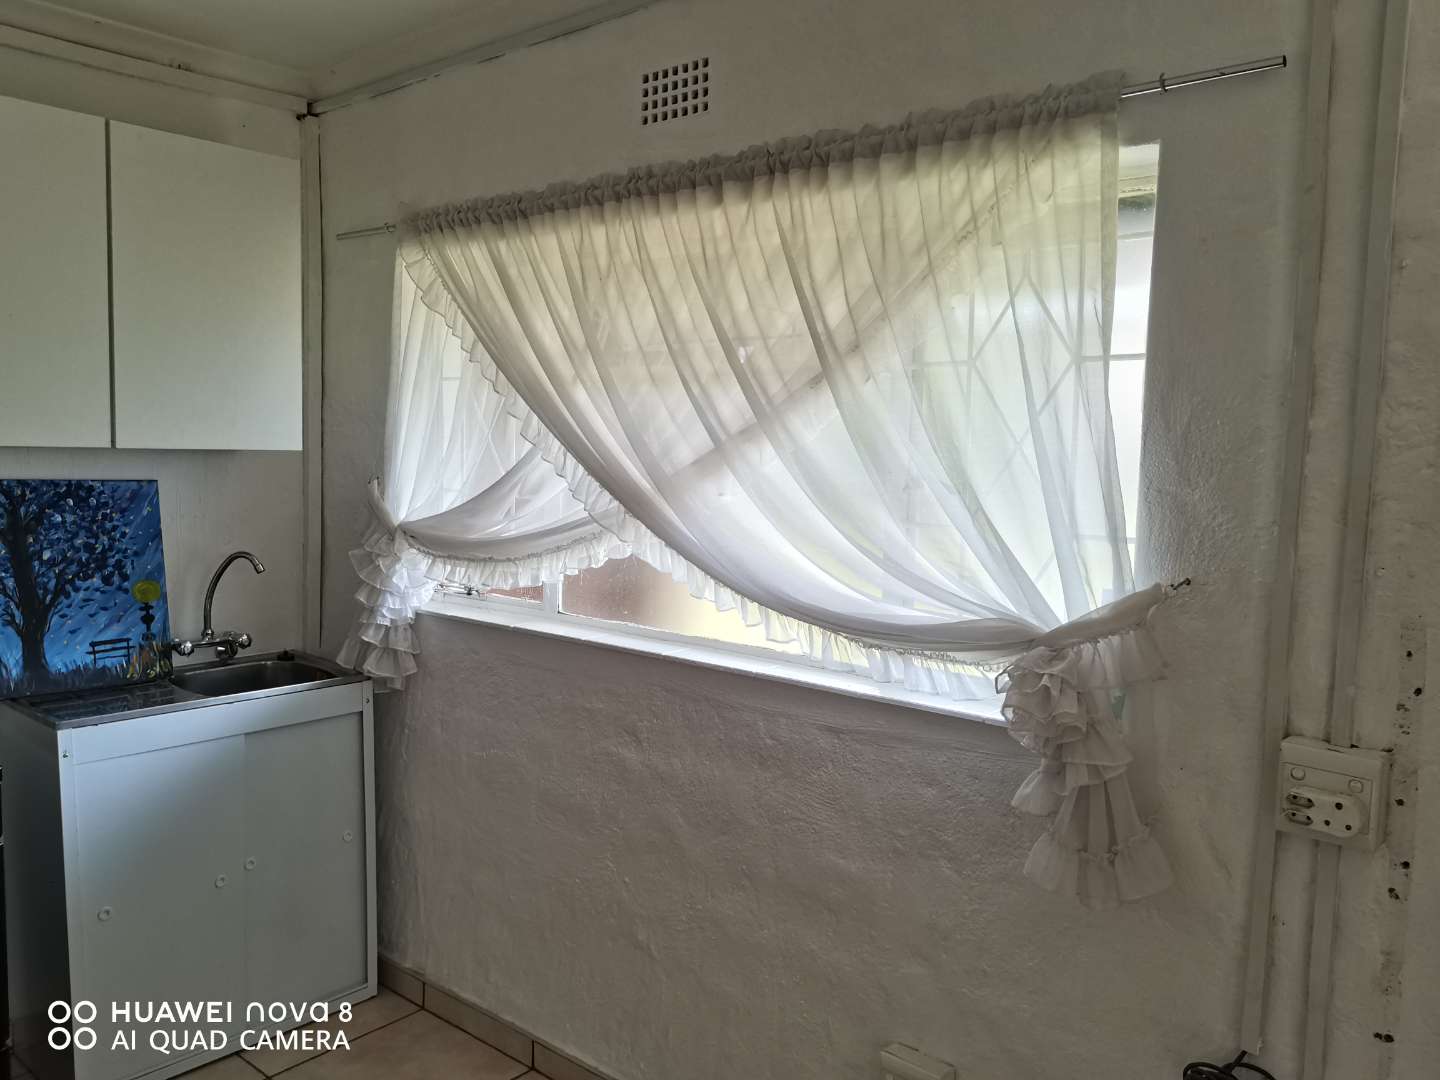 To Let 1 Bedroom Property for Rent in Linmeyer Gauteng